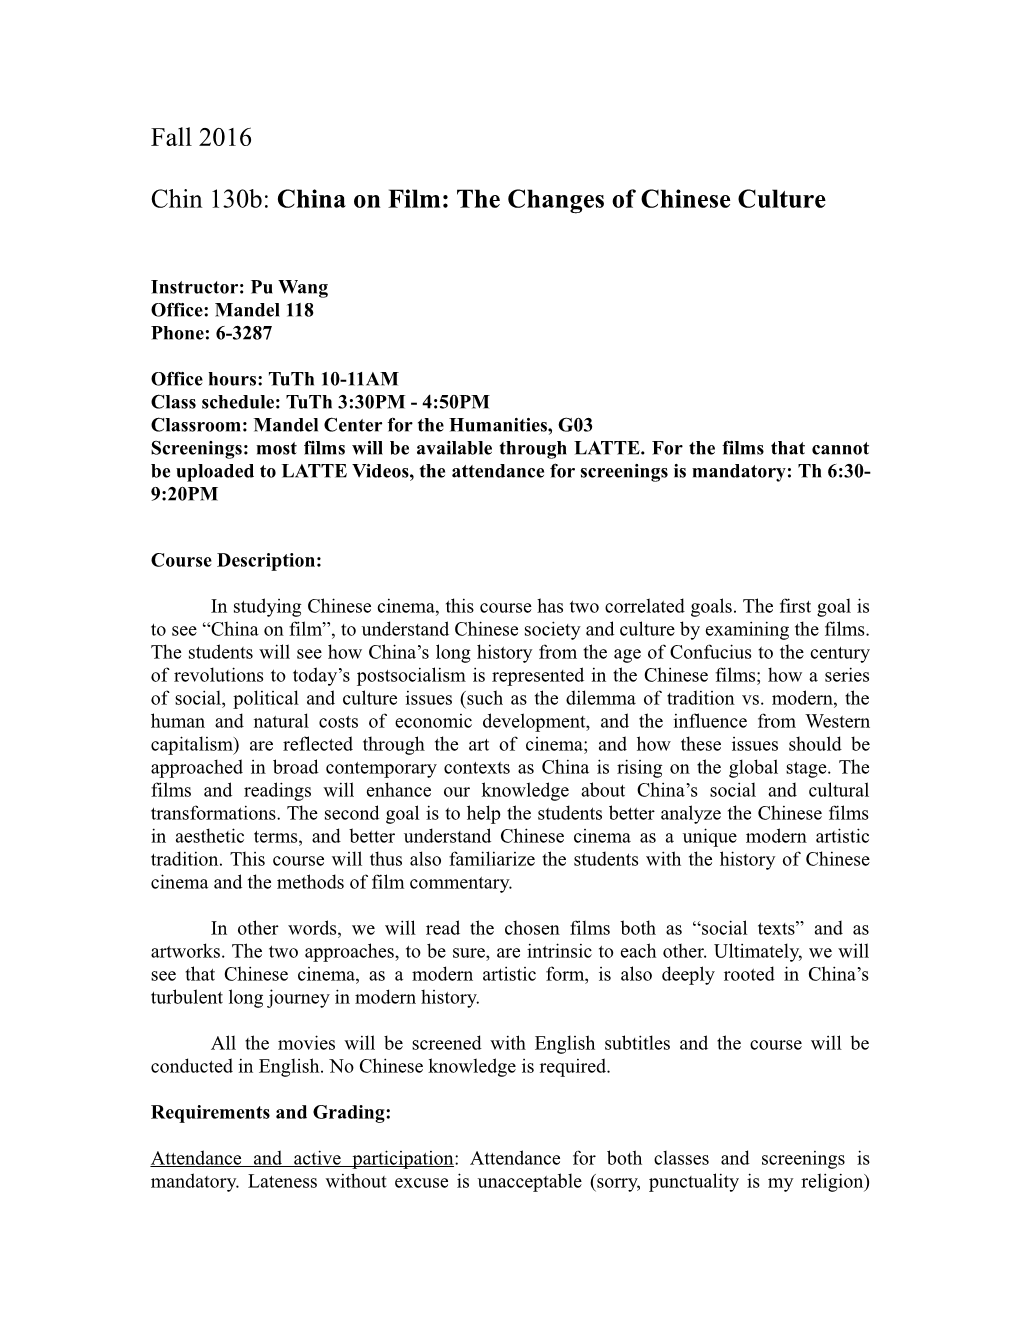 Chin 130B: China on Film: the Changes of Chinese Culture